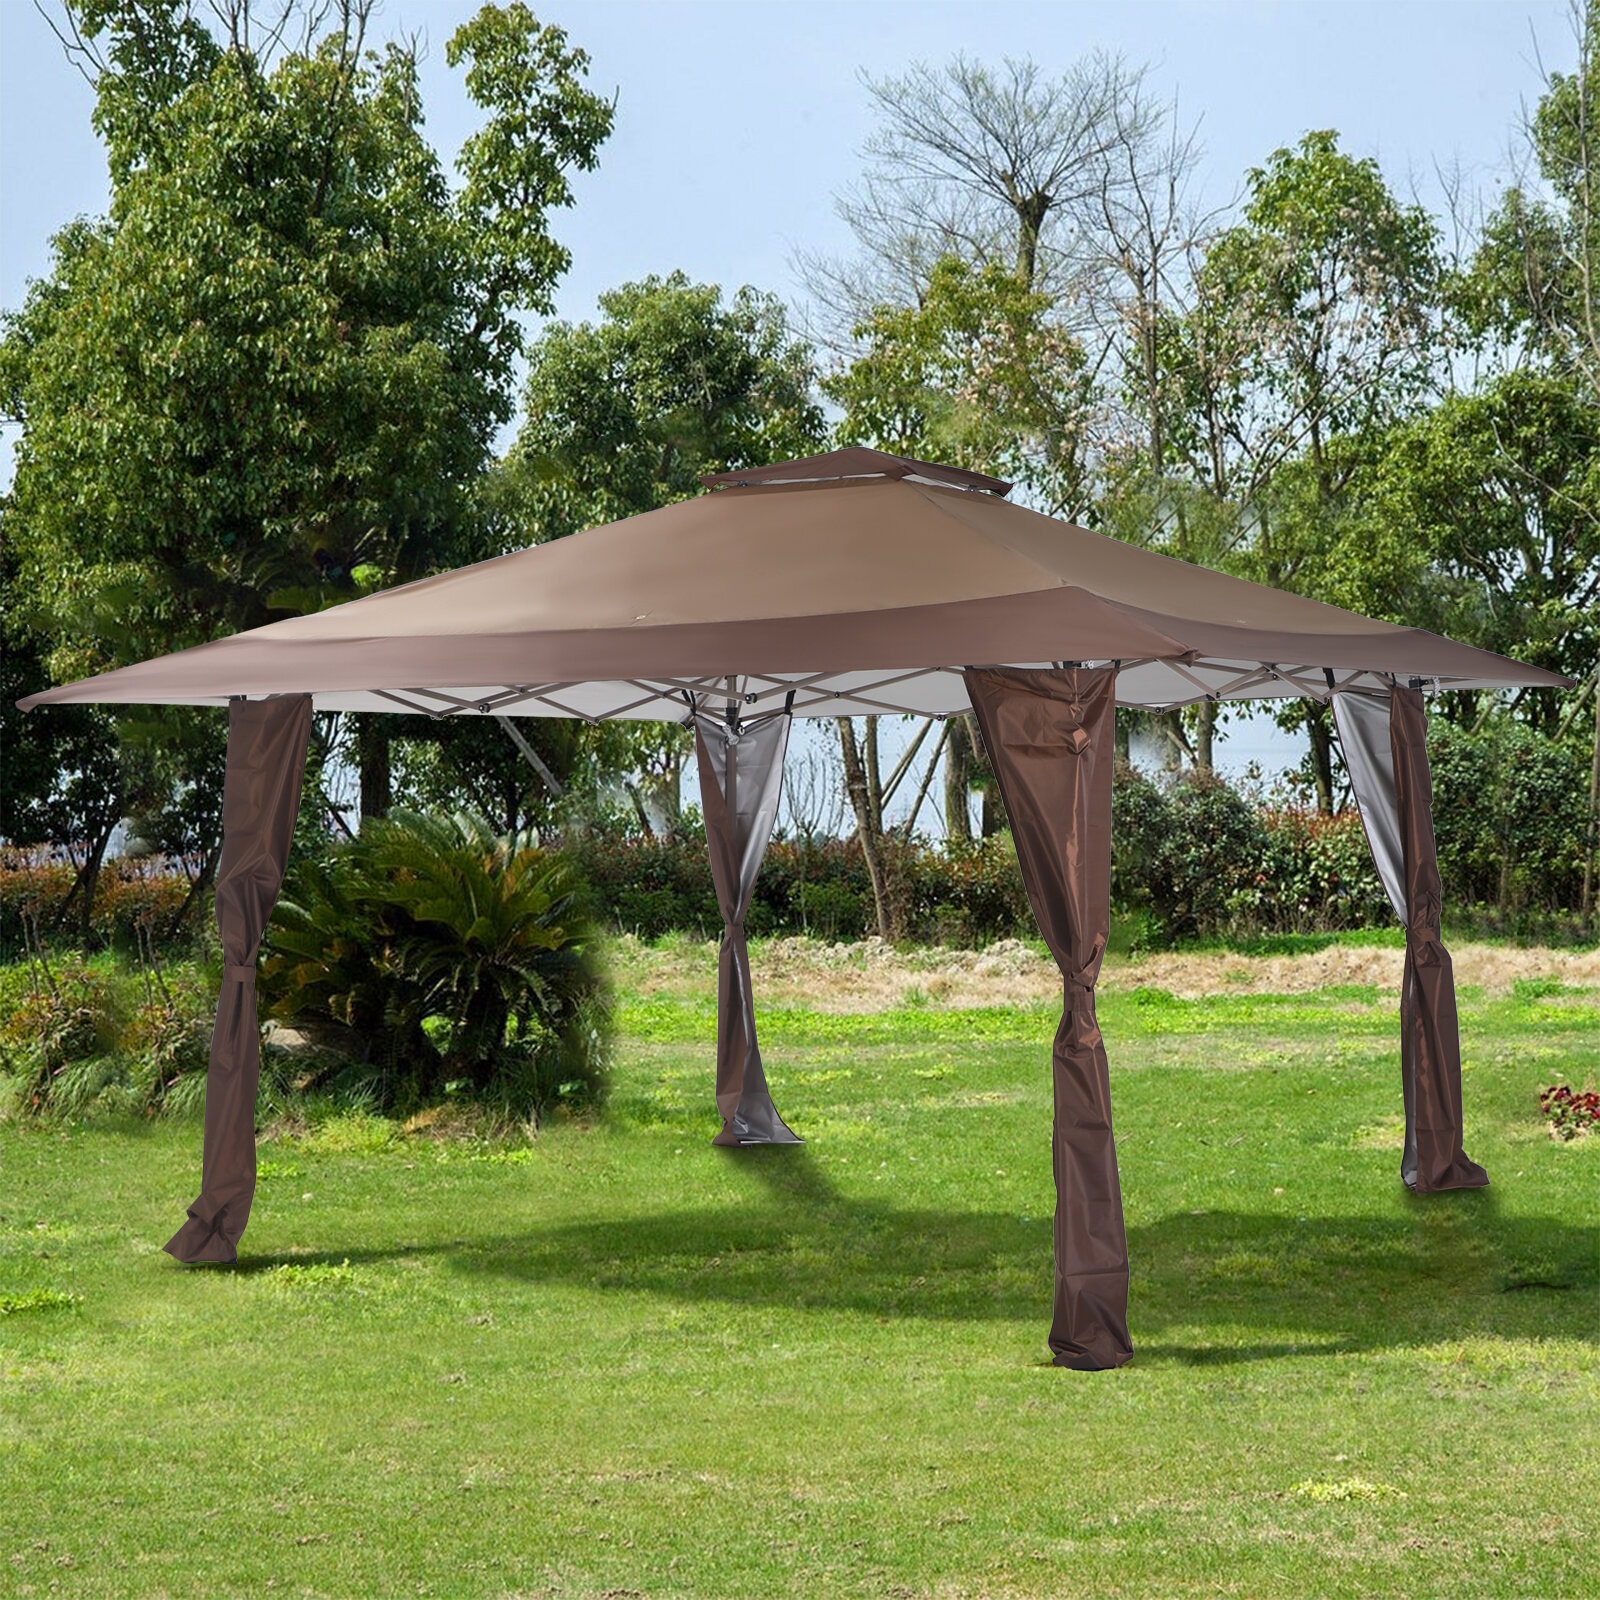 10' x 13' Gazebo Top Canopy Replacement 2 tier UV Patio Outdoor Sunshade Cover